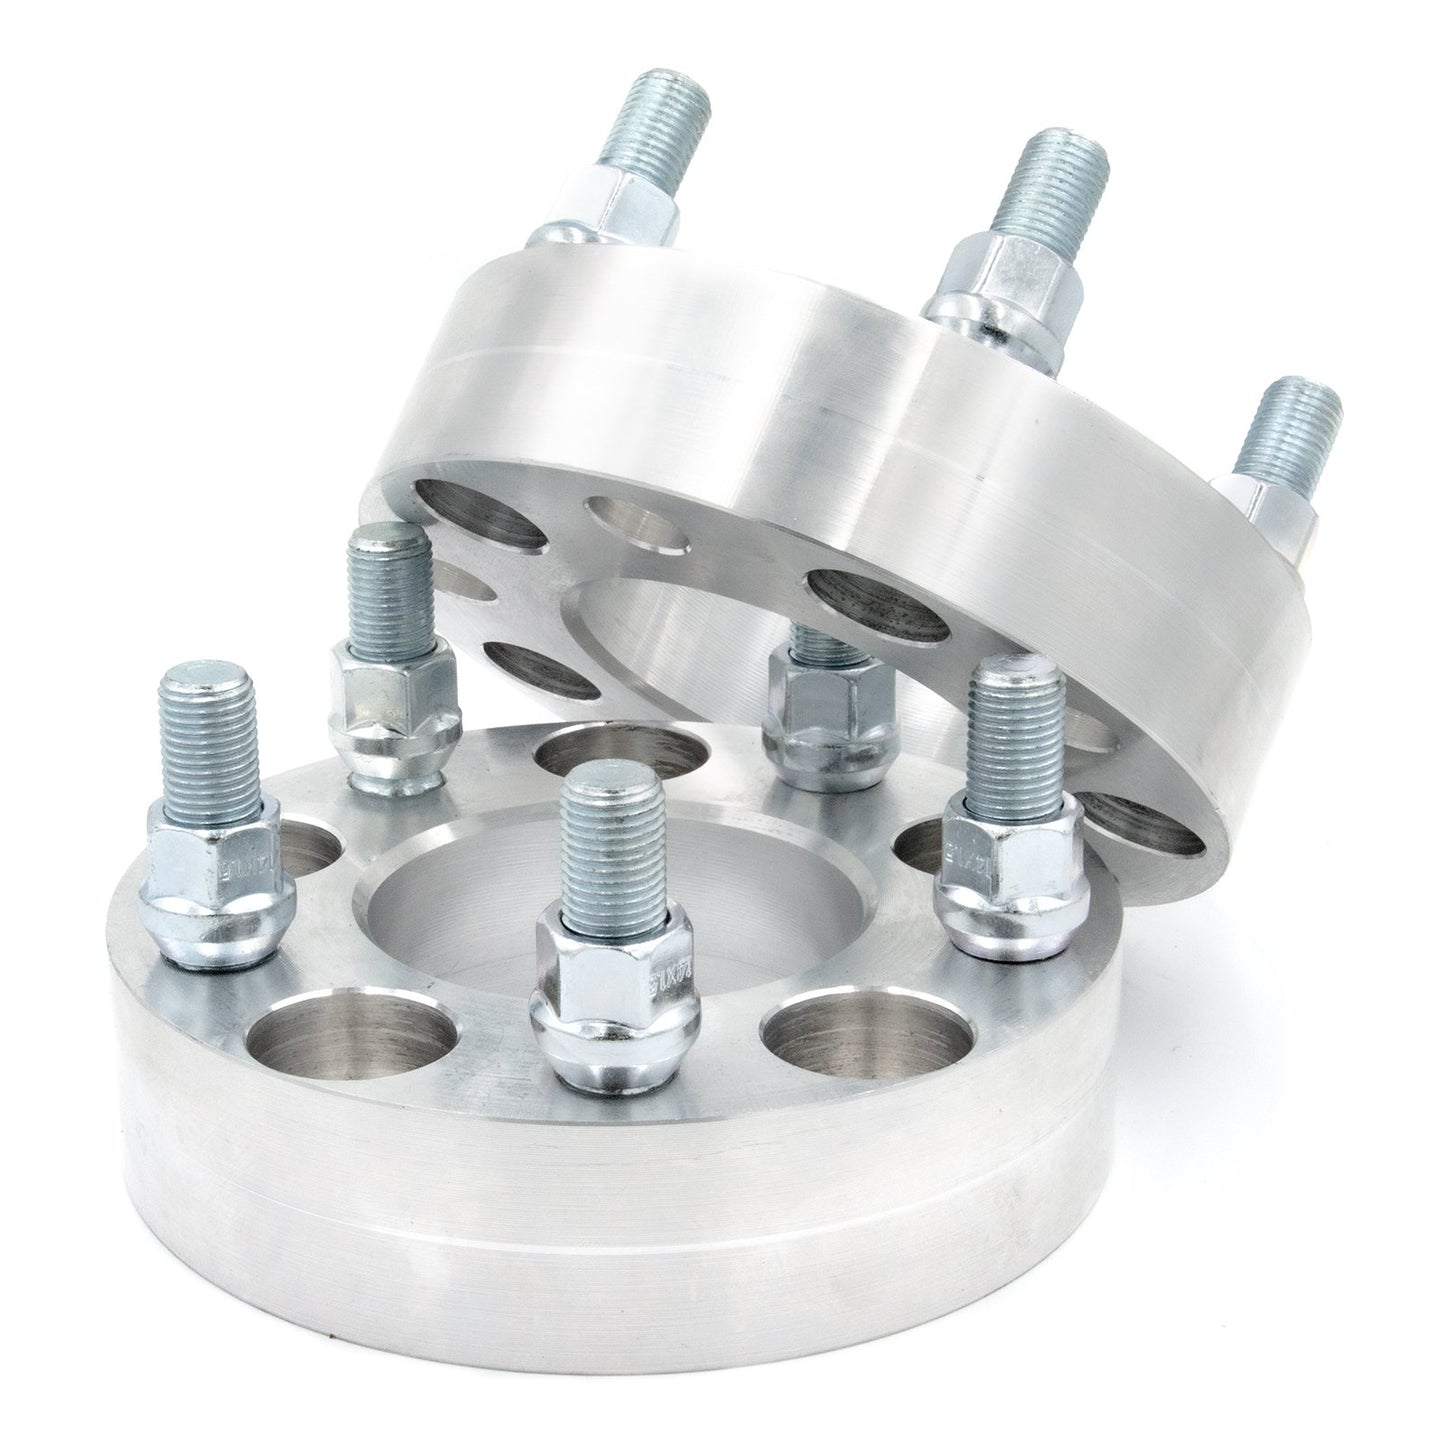 5x110 to 5x130 Wheel Spacer/Adapter - Thickness: 3/4"- 4"